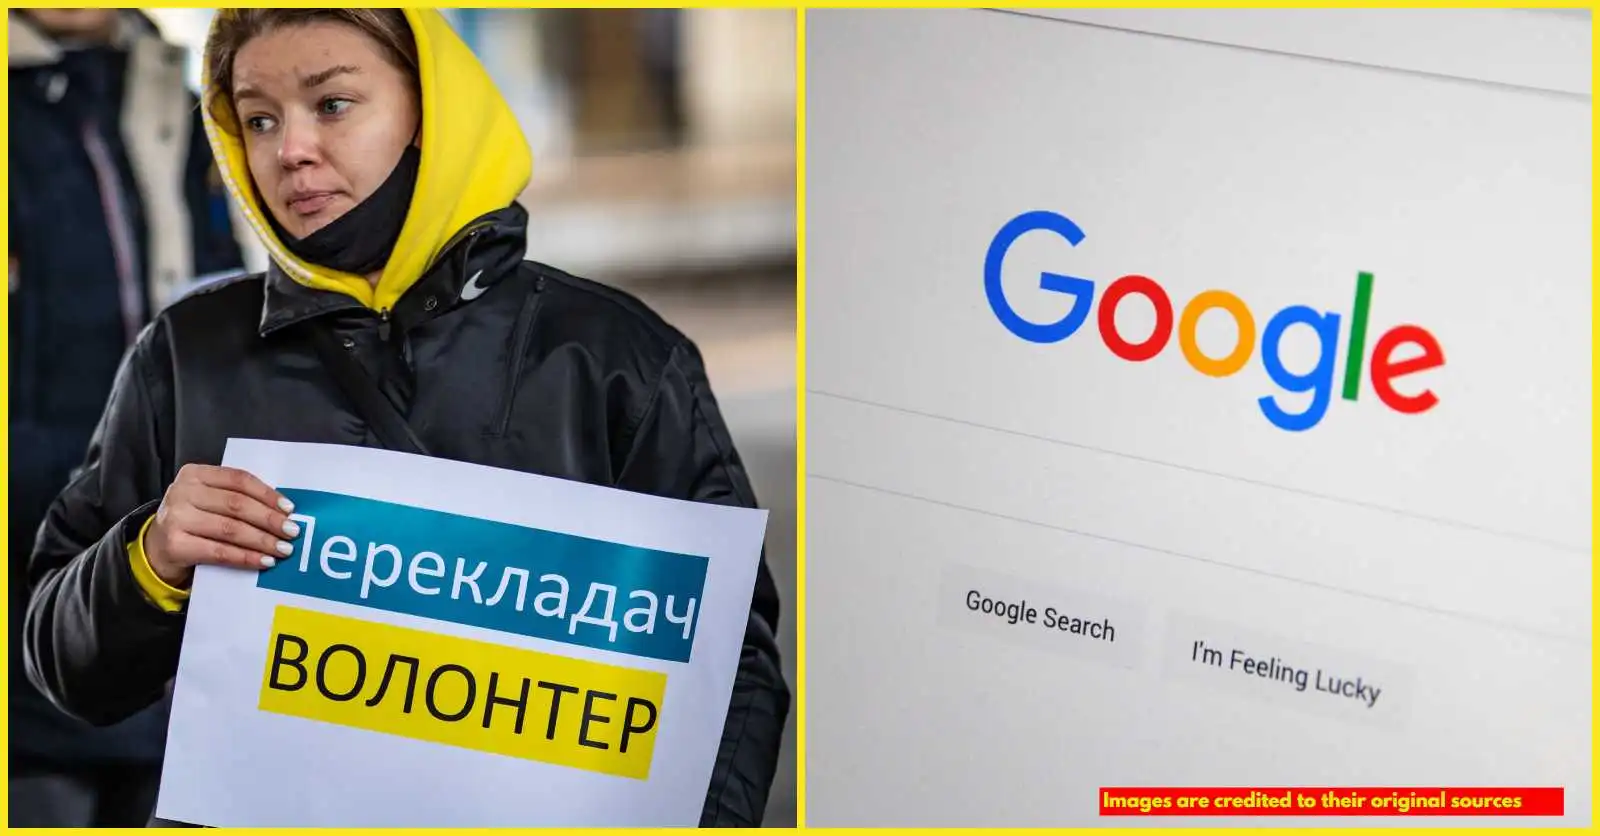 How to use Google Image Translator and How to translate Images into text Explained below.